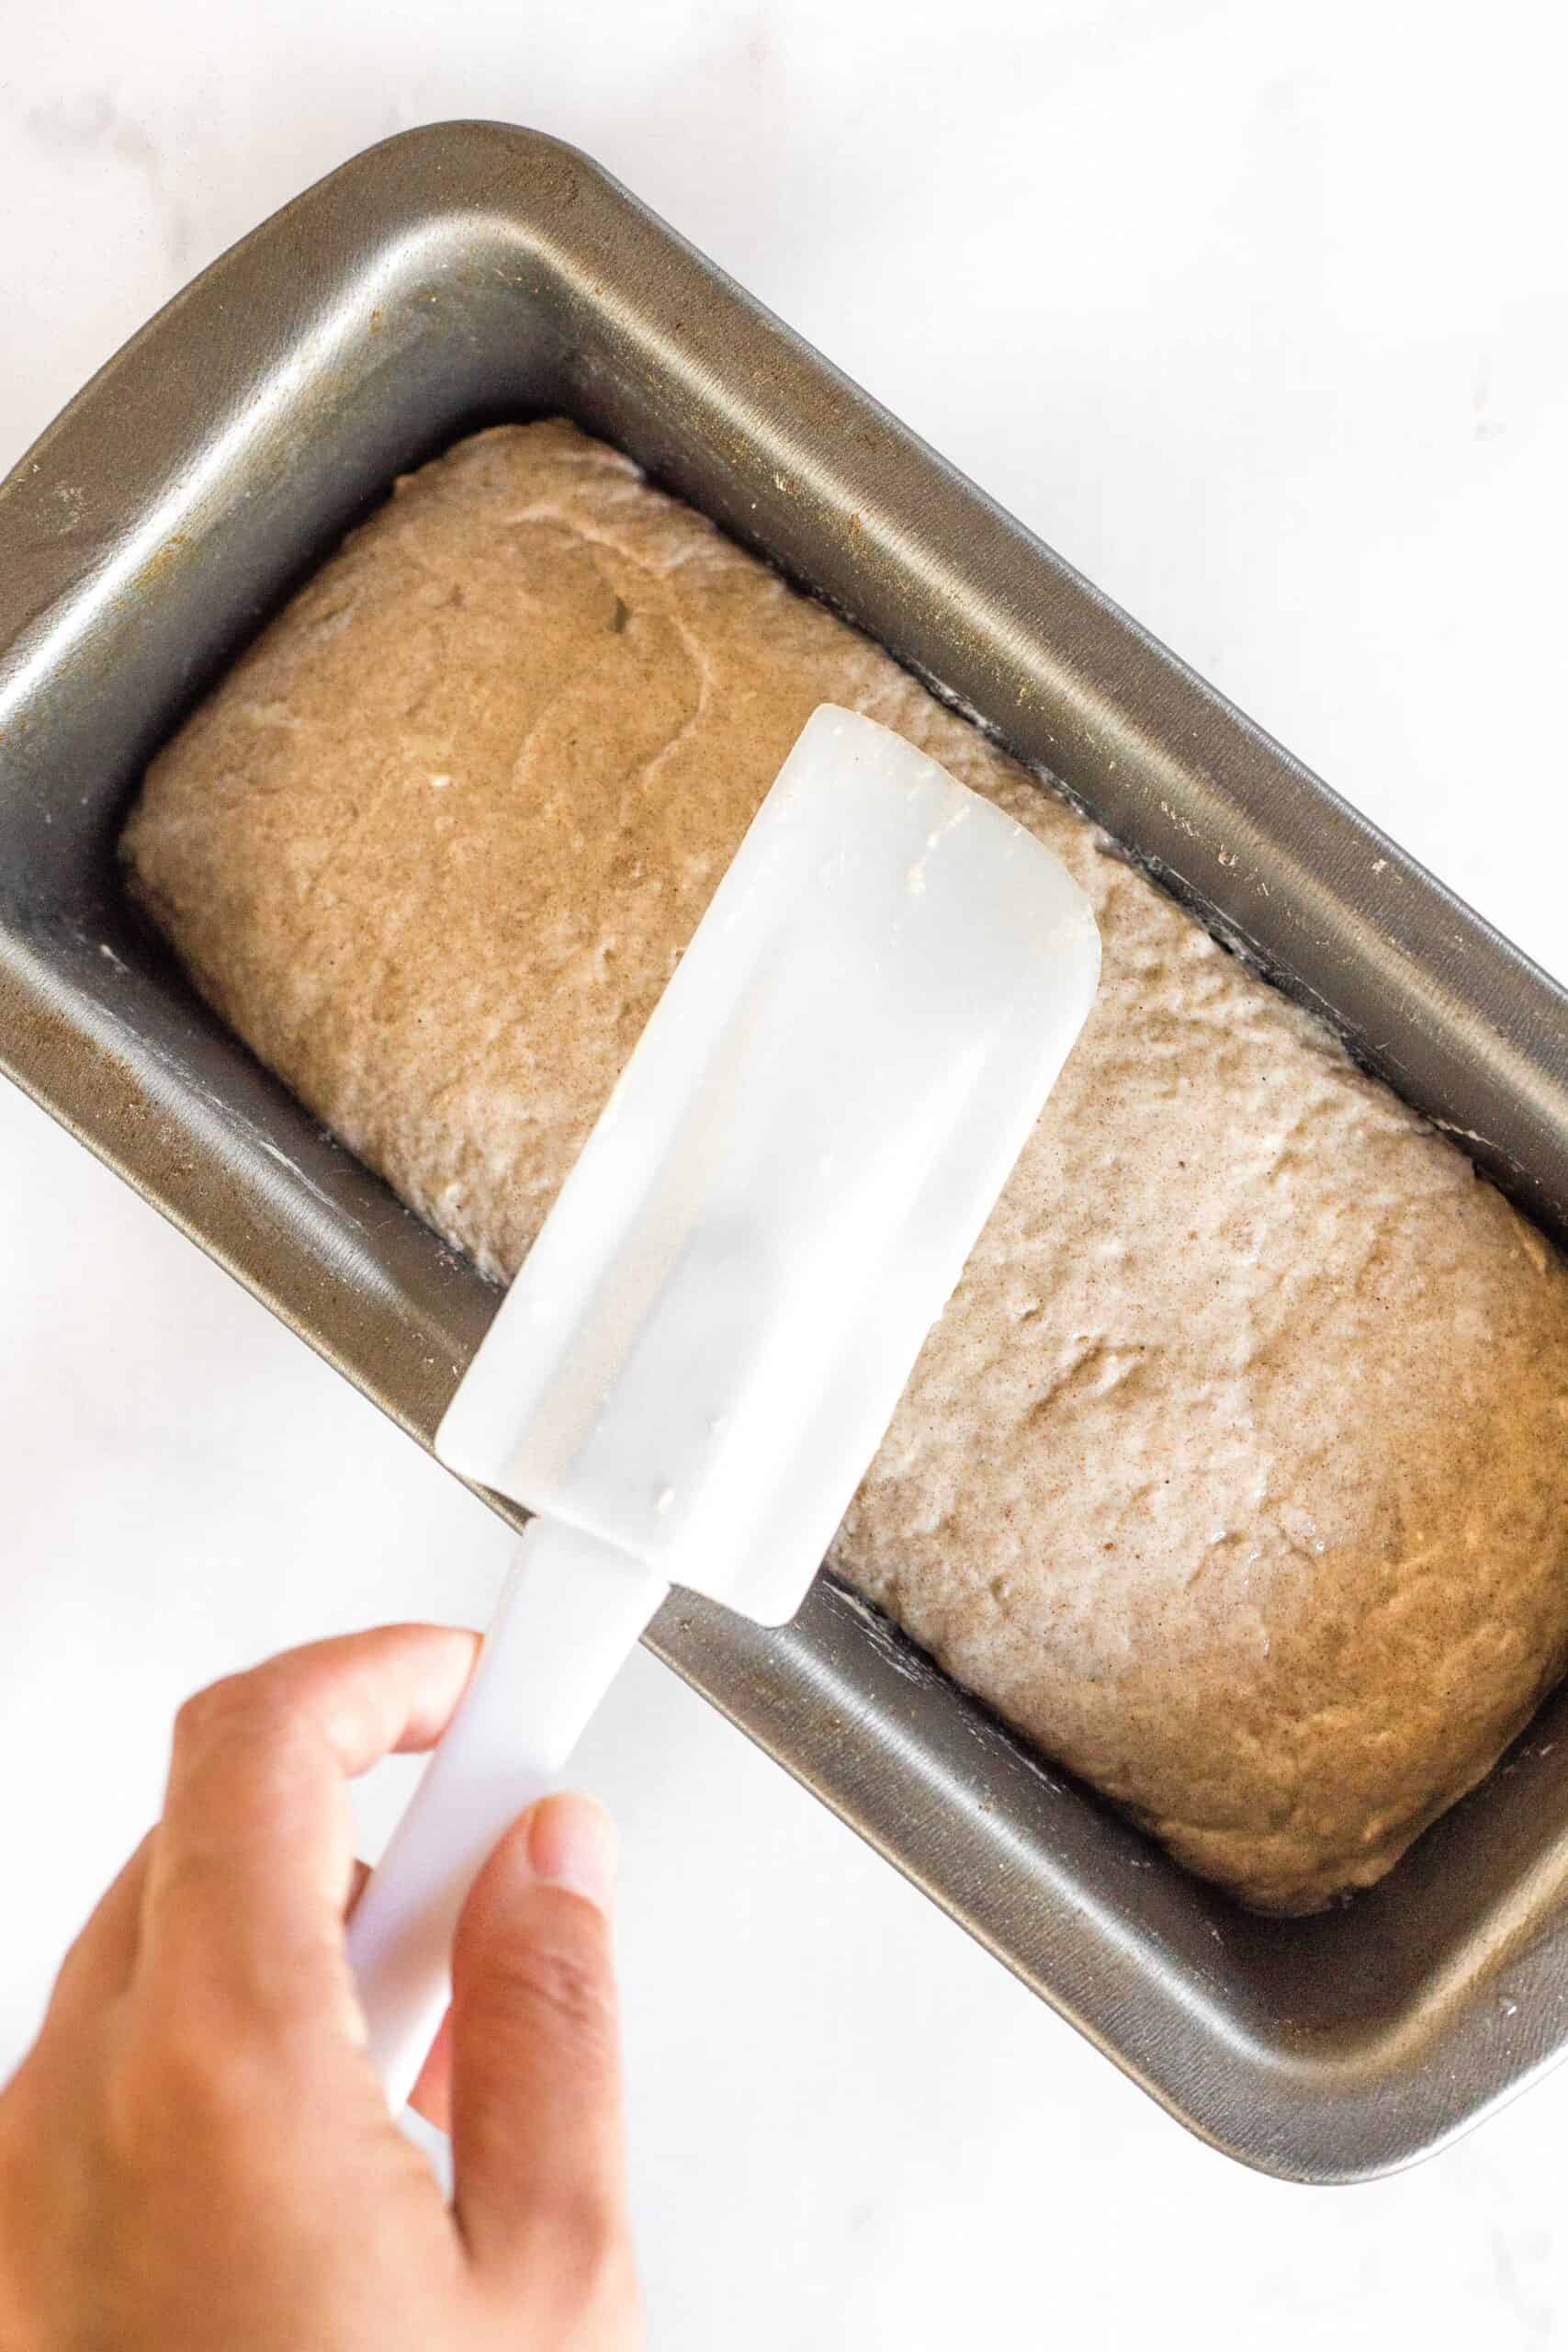 Smoothing out teff bread dough with spatula.